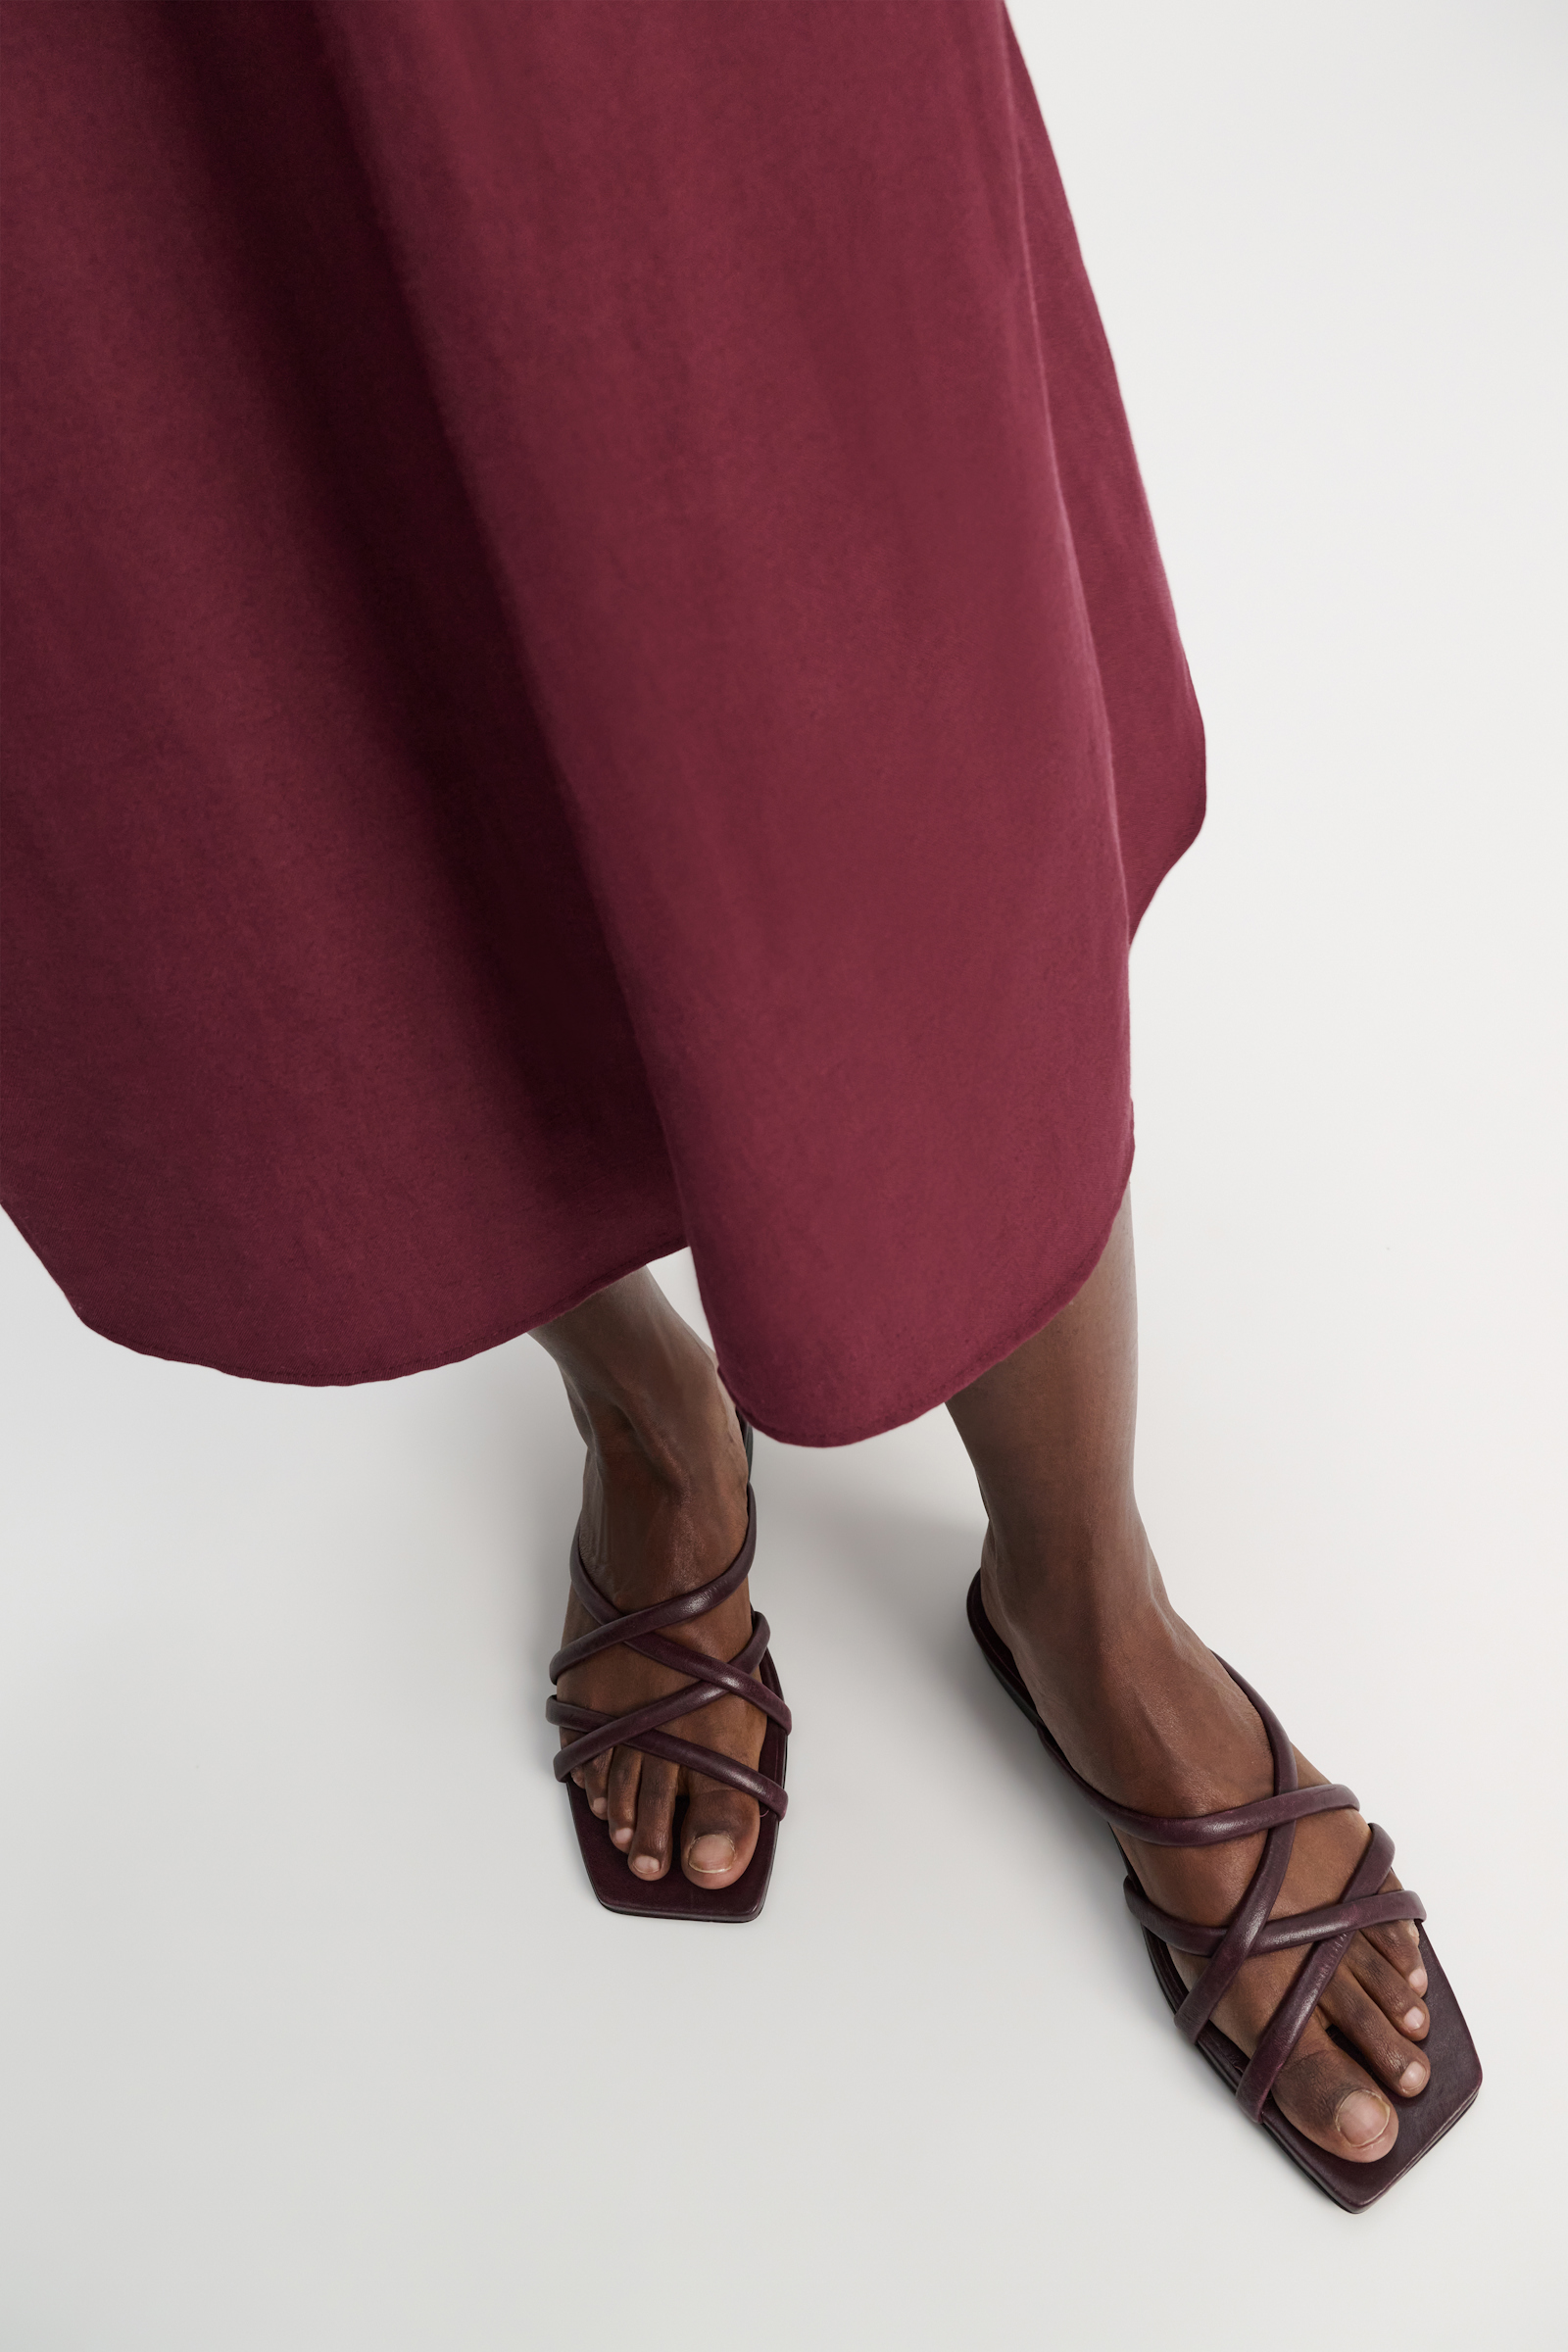 Dorothee Schumacher Square toe flat sandals with removable leather flower bordeaux